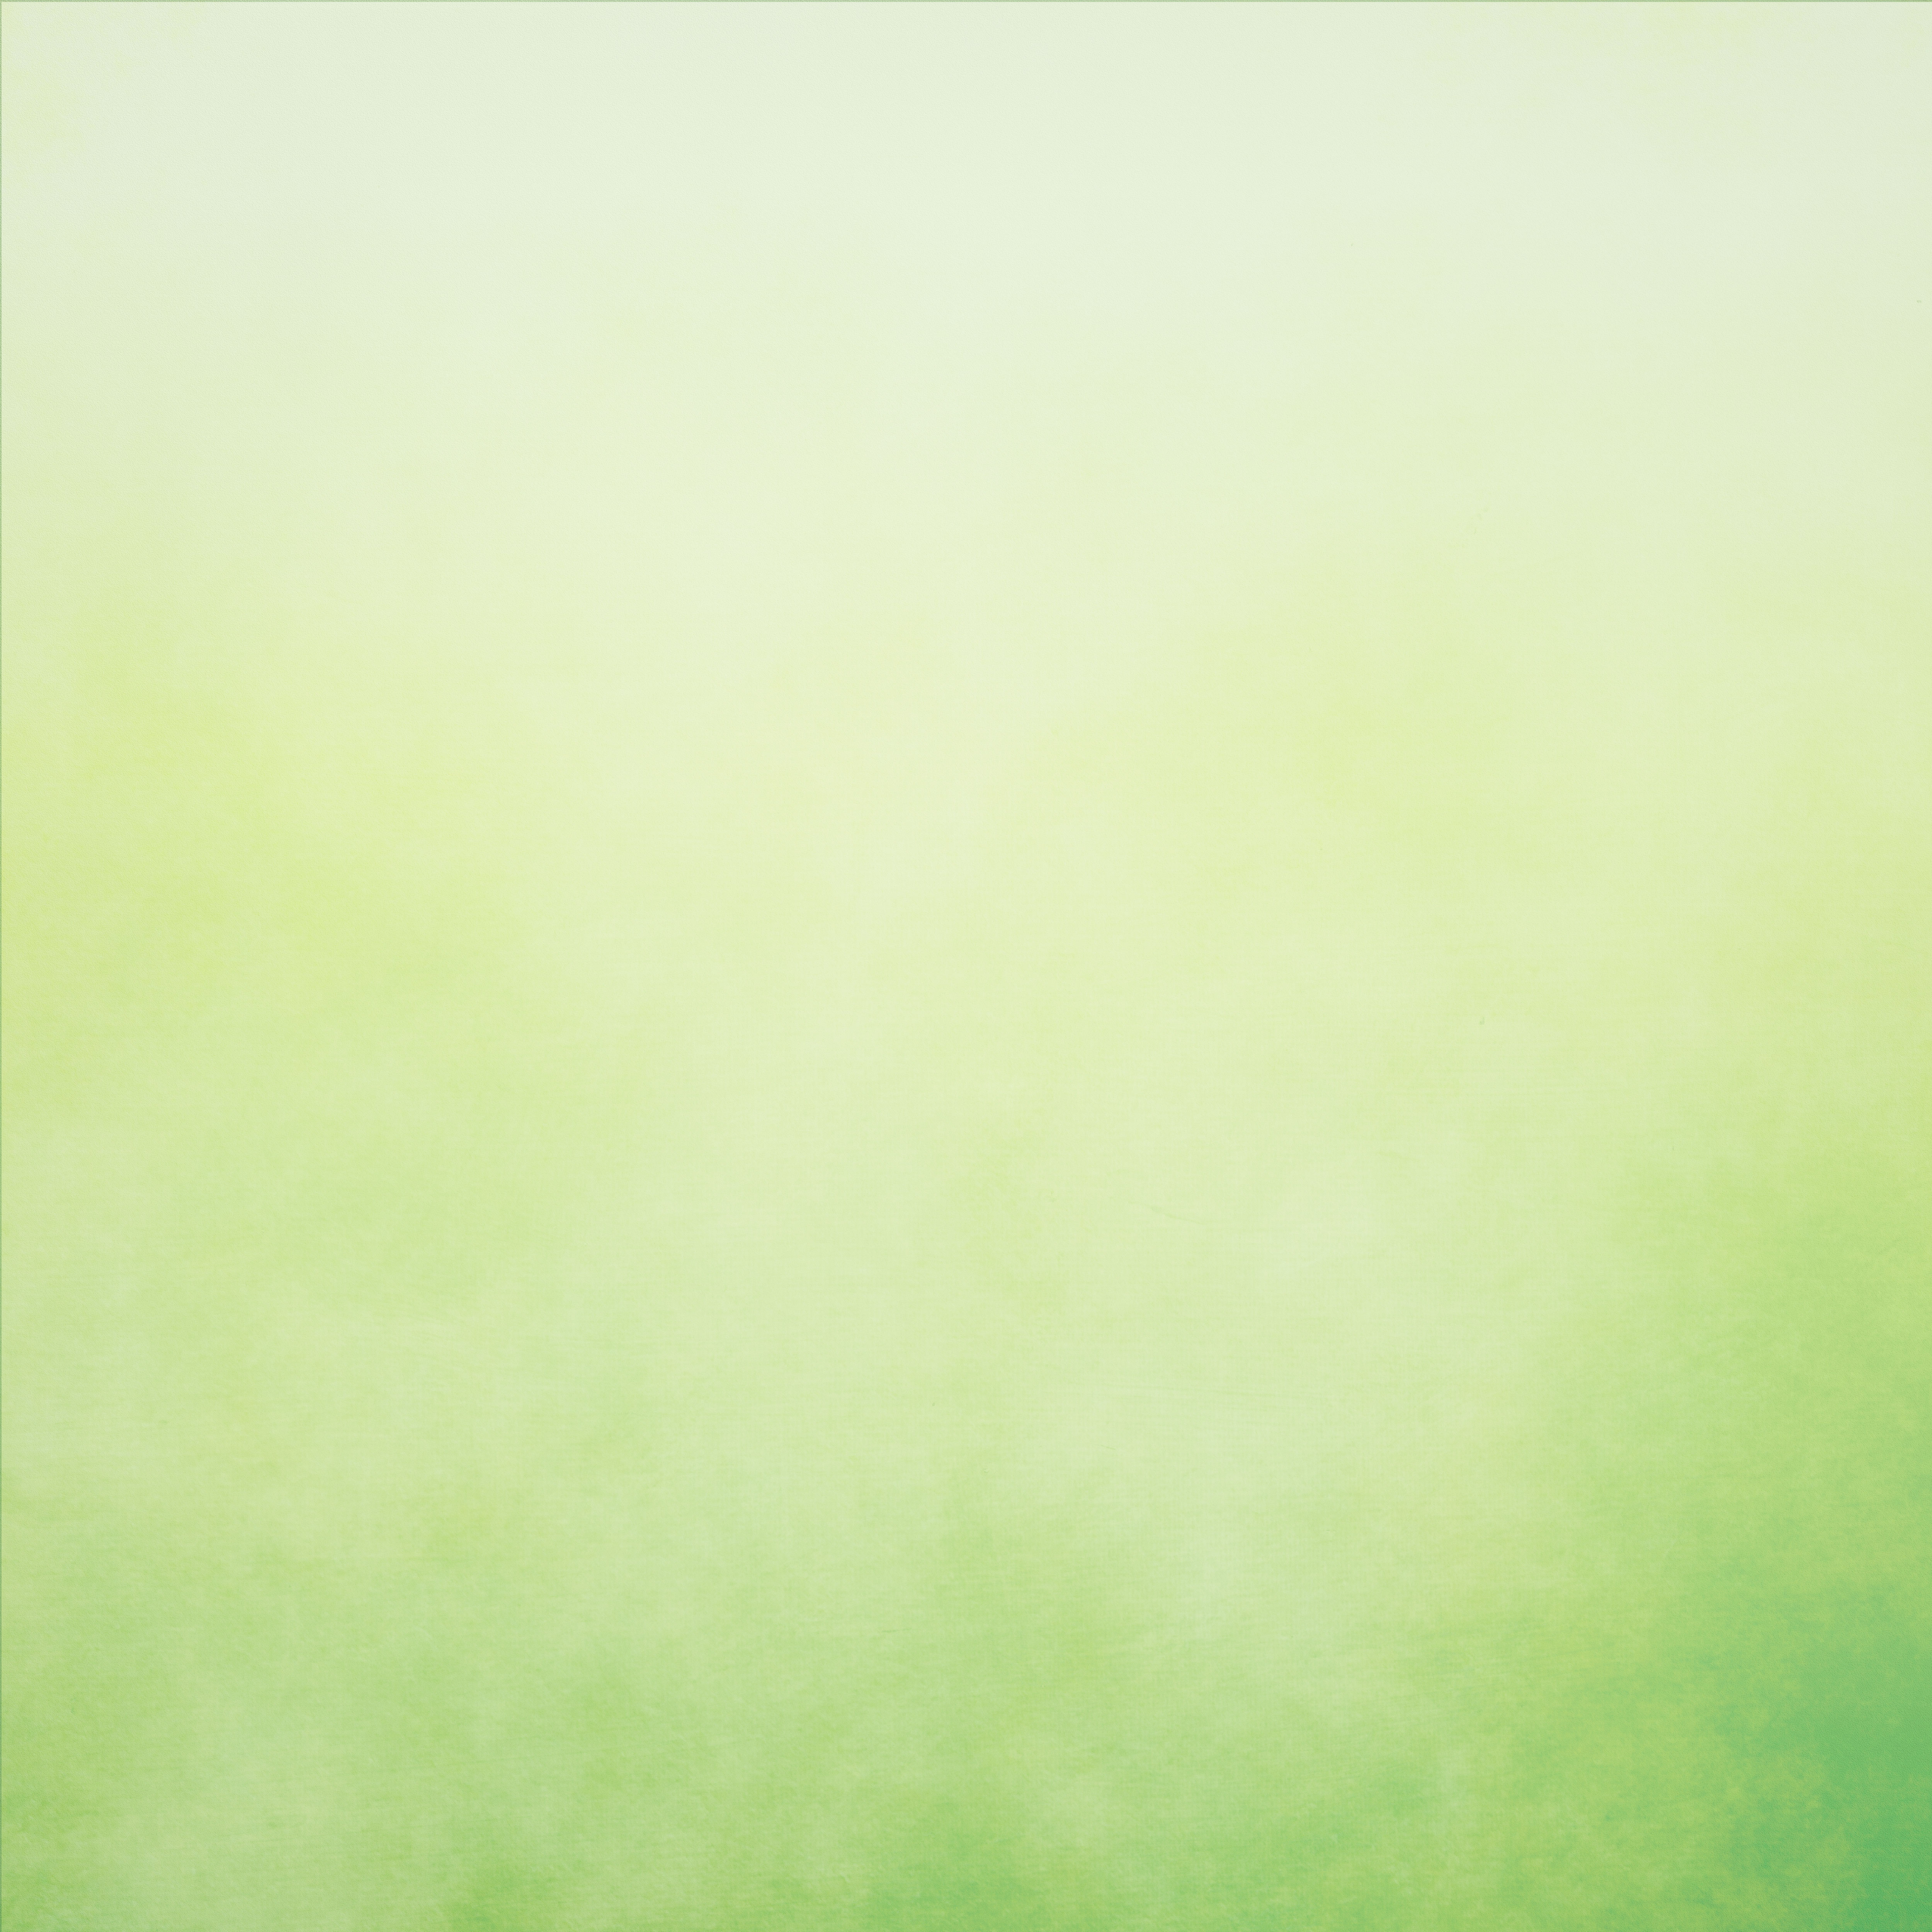 Abstract Green Background Lime Color Vintage Grunge Texture